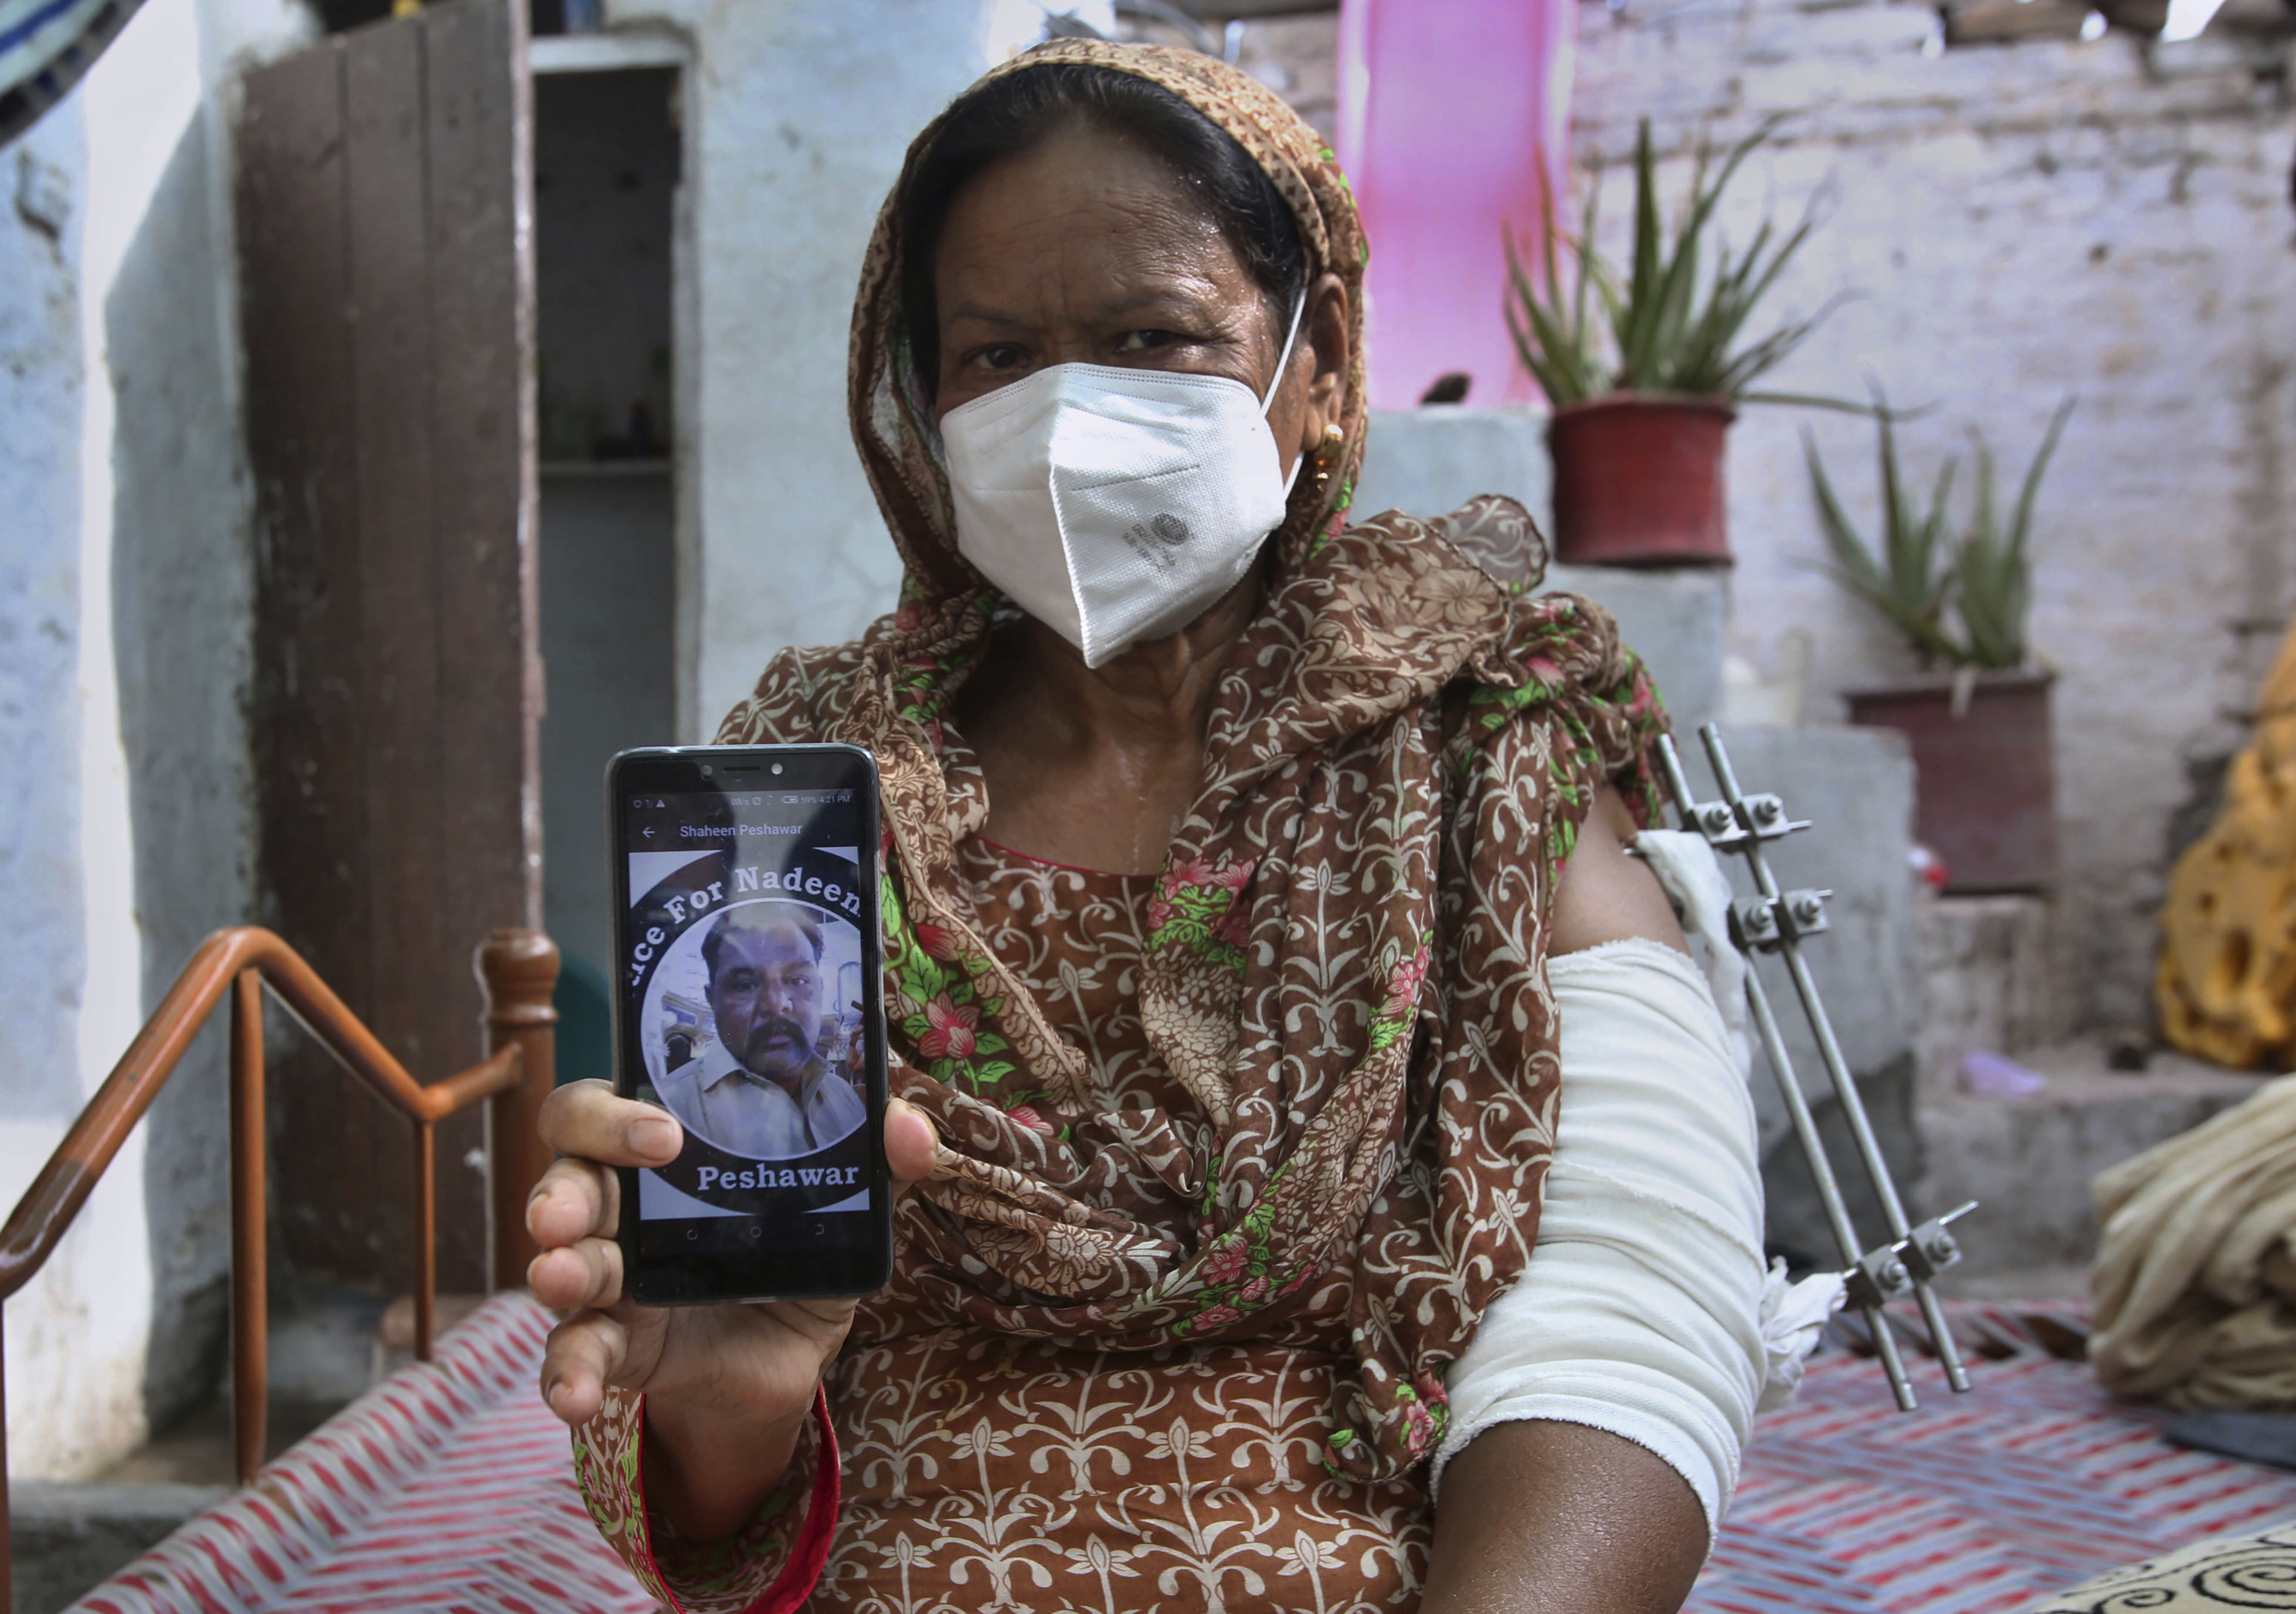 Elizabeth Lal, a Christian woman who was injured and her son-in-law Nadeem Jordon killed by gunmen because he rented in a Muslim neighborhood, shows a picture of Jordon on her mobile during an interview with the Associated Press, in Peshawar, Pakistan, Thursday, July 9, 2020. Analysts and activists say minorities in Pakistan are increasingly vulnerable to Islamic extremists as Prime Minister Imran Khan vacillates between trying to forge a pluralistic nation and his conservative Islamic beliefs. Photo: AP